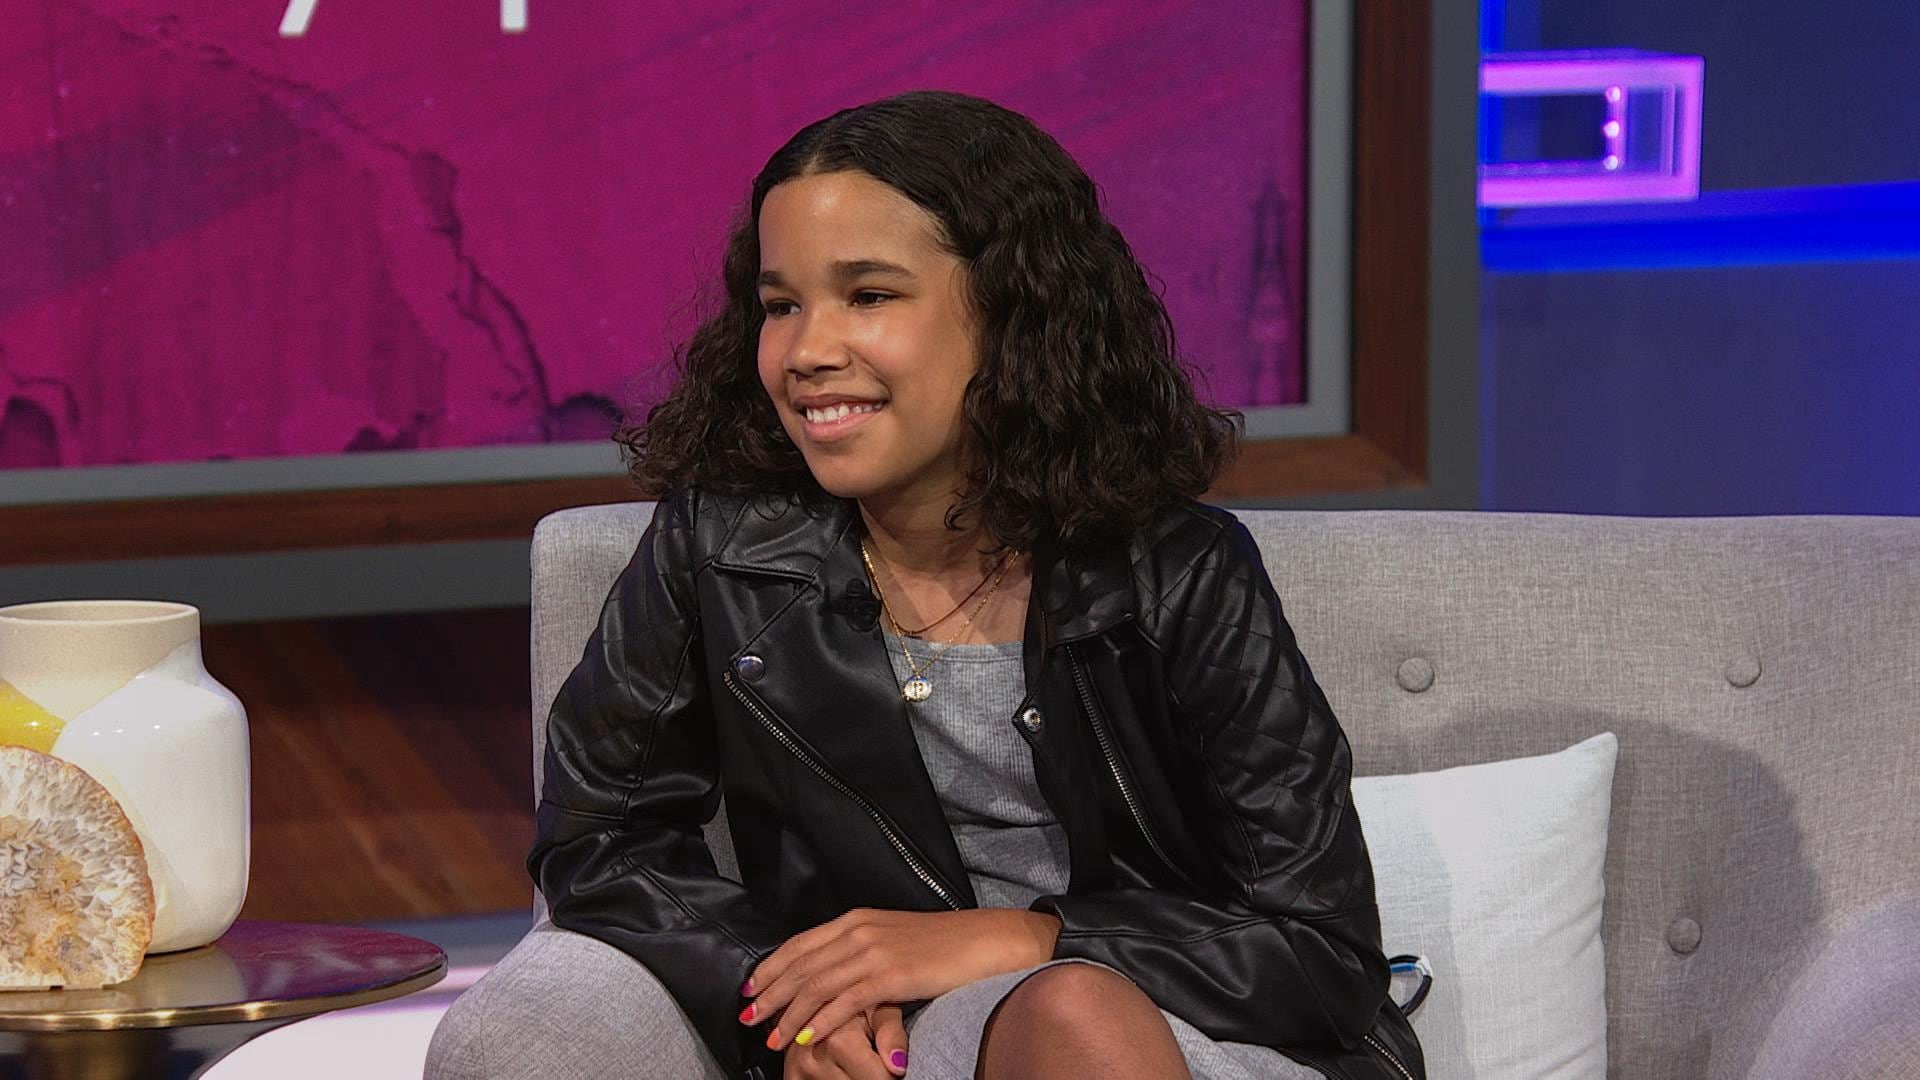 Meet The 11-Year-Old Journalist Who Made Her ESPN Sideline Debut